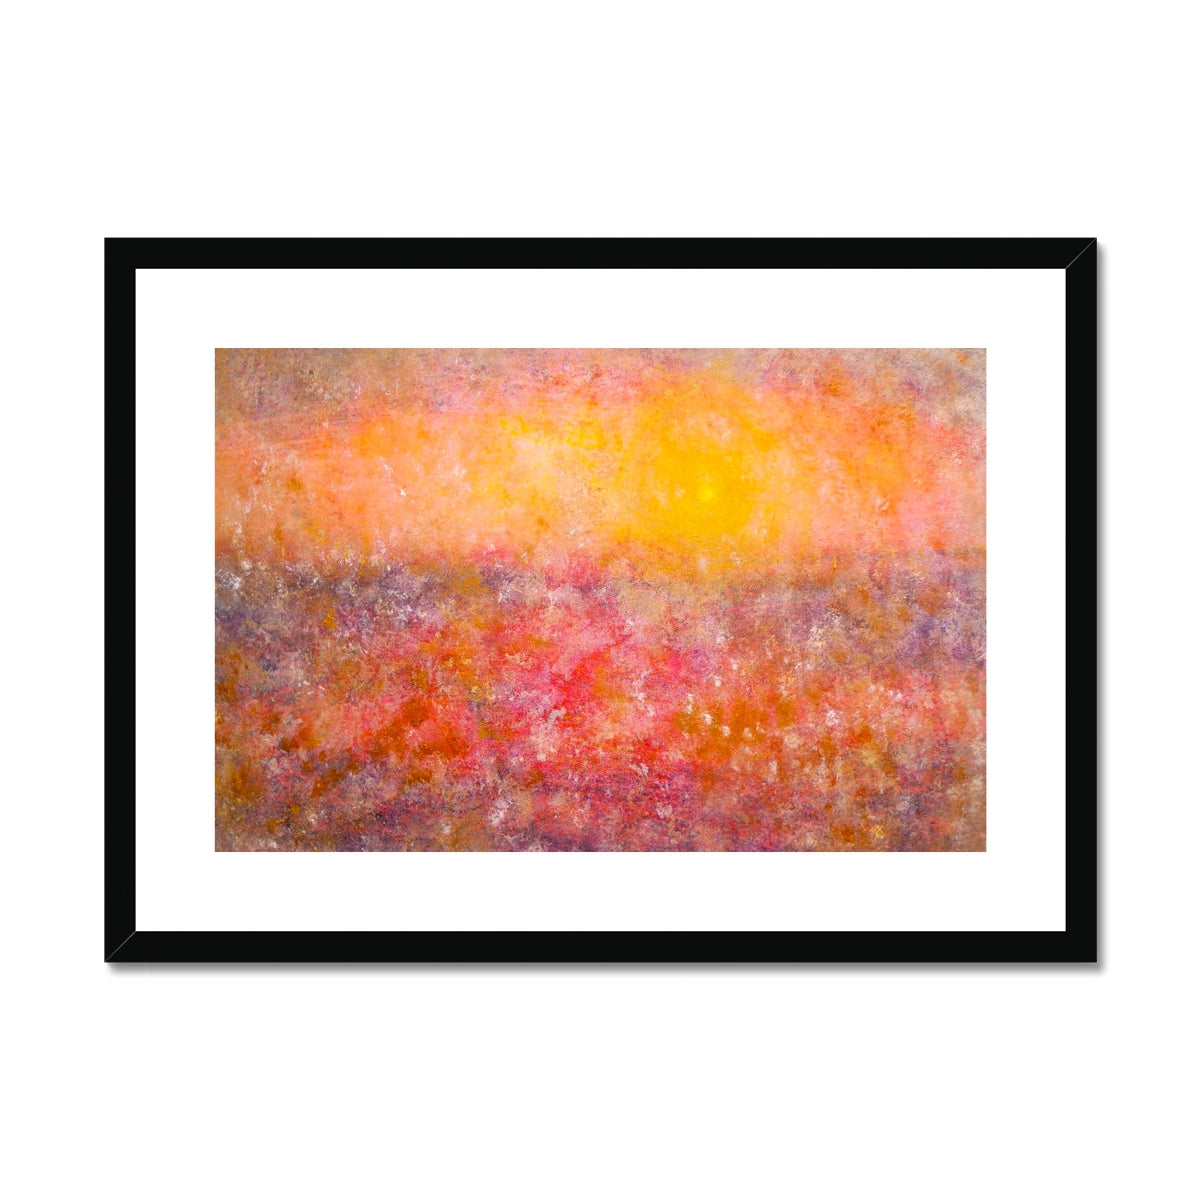 Sunrise Mist Horizon Abstract Painting | Framed & Mounted Prints From Scotland-Framed & Mounted Prints-Abstract & Impressionistic Art Gallery-A2 Landscape-Black Frame-Paintings, Prints, Homeware, Art Gifts From Scotland By Scottish Artist Kevin Hunter